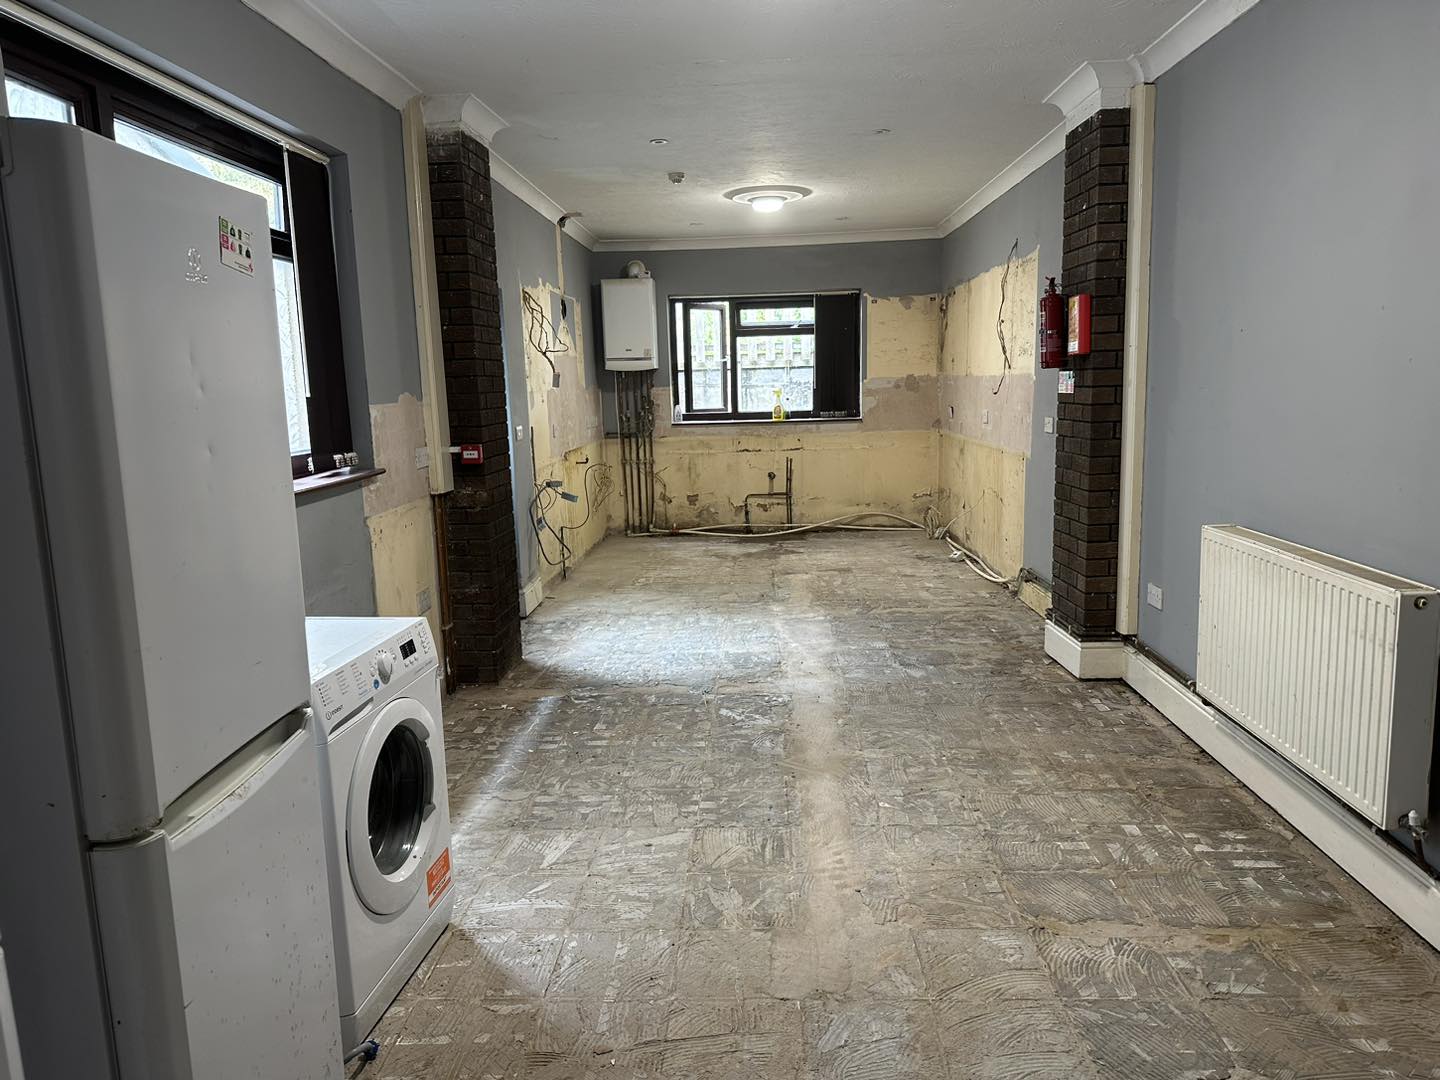 A photo of a stripped out kitchen